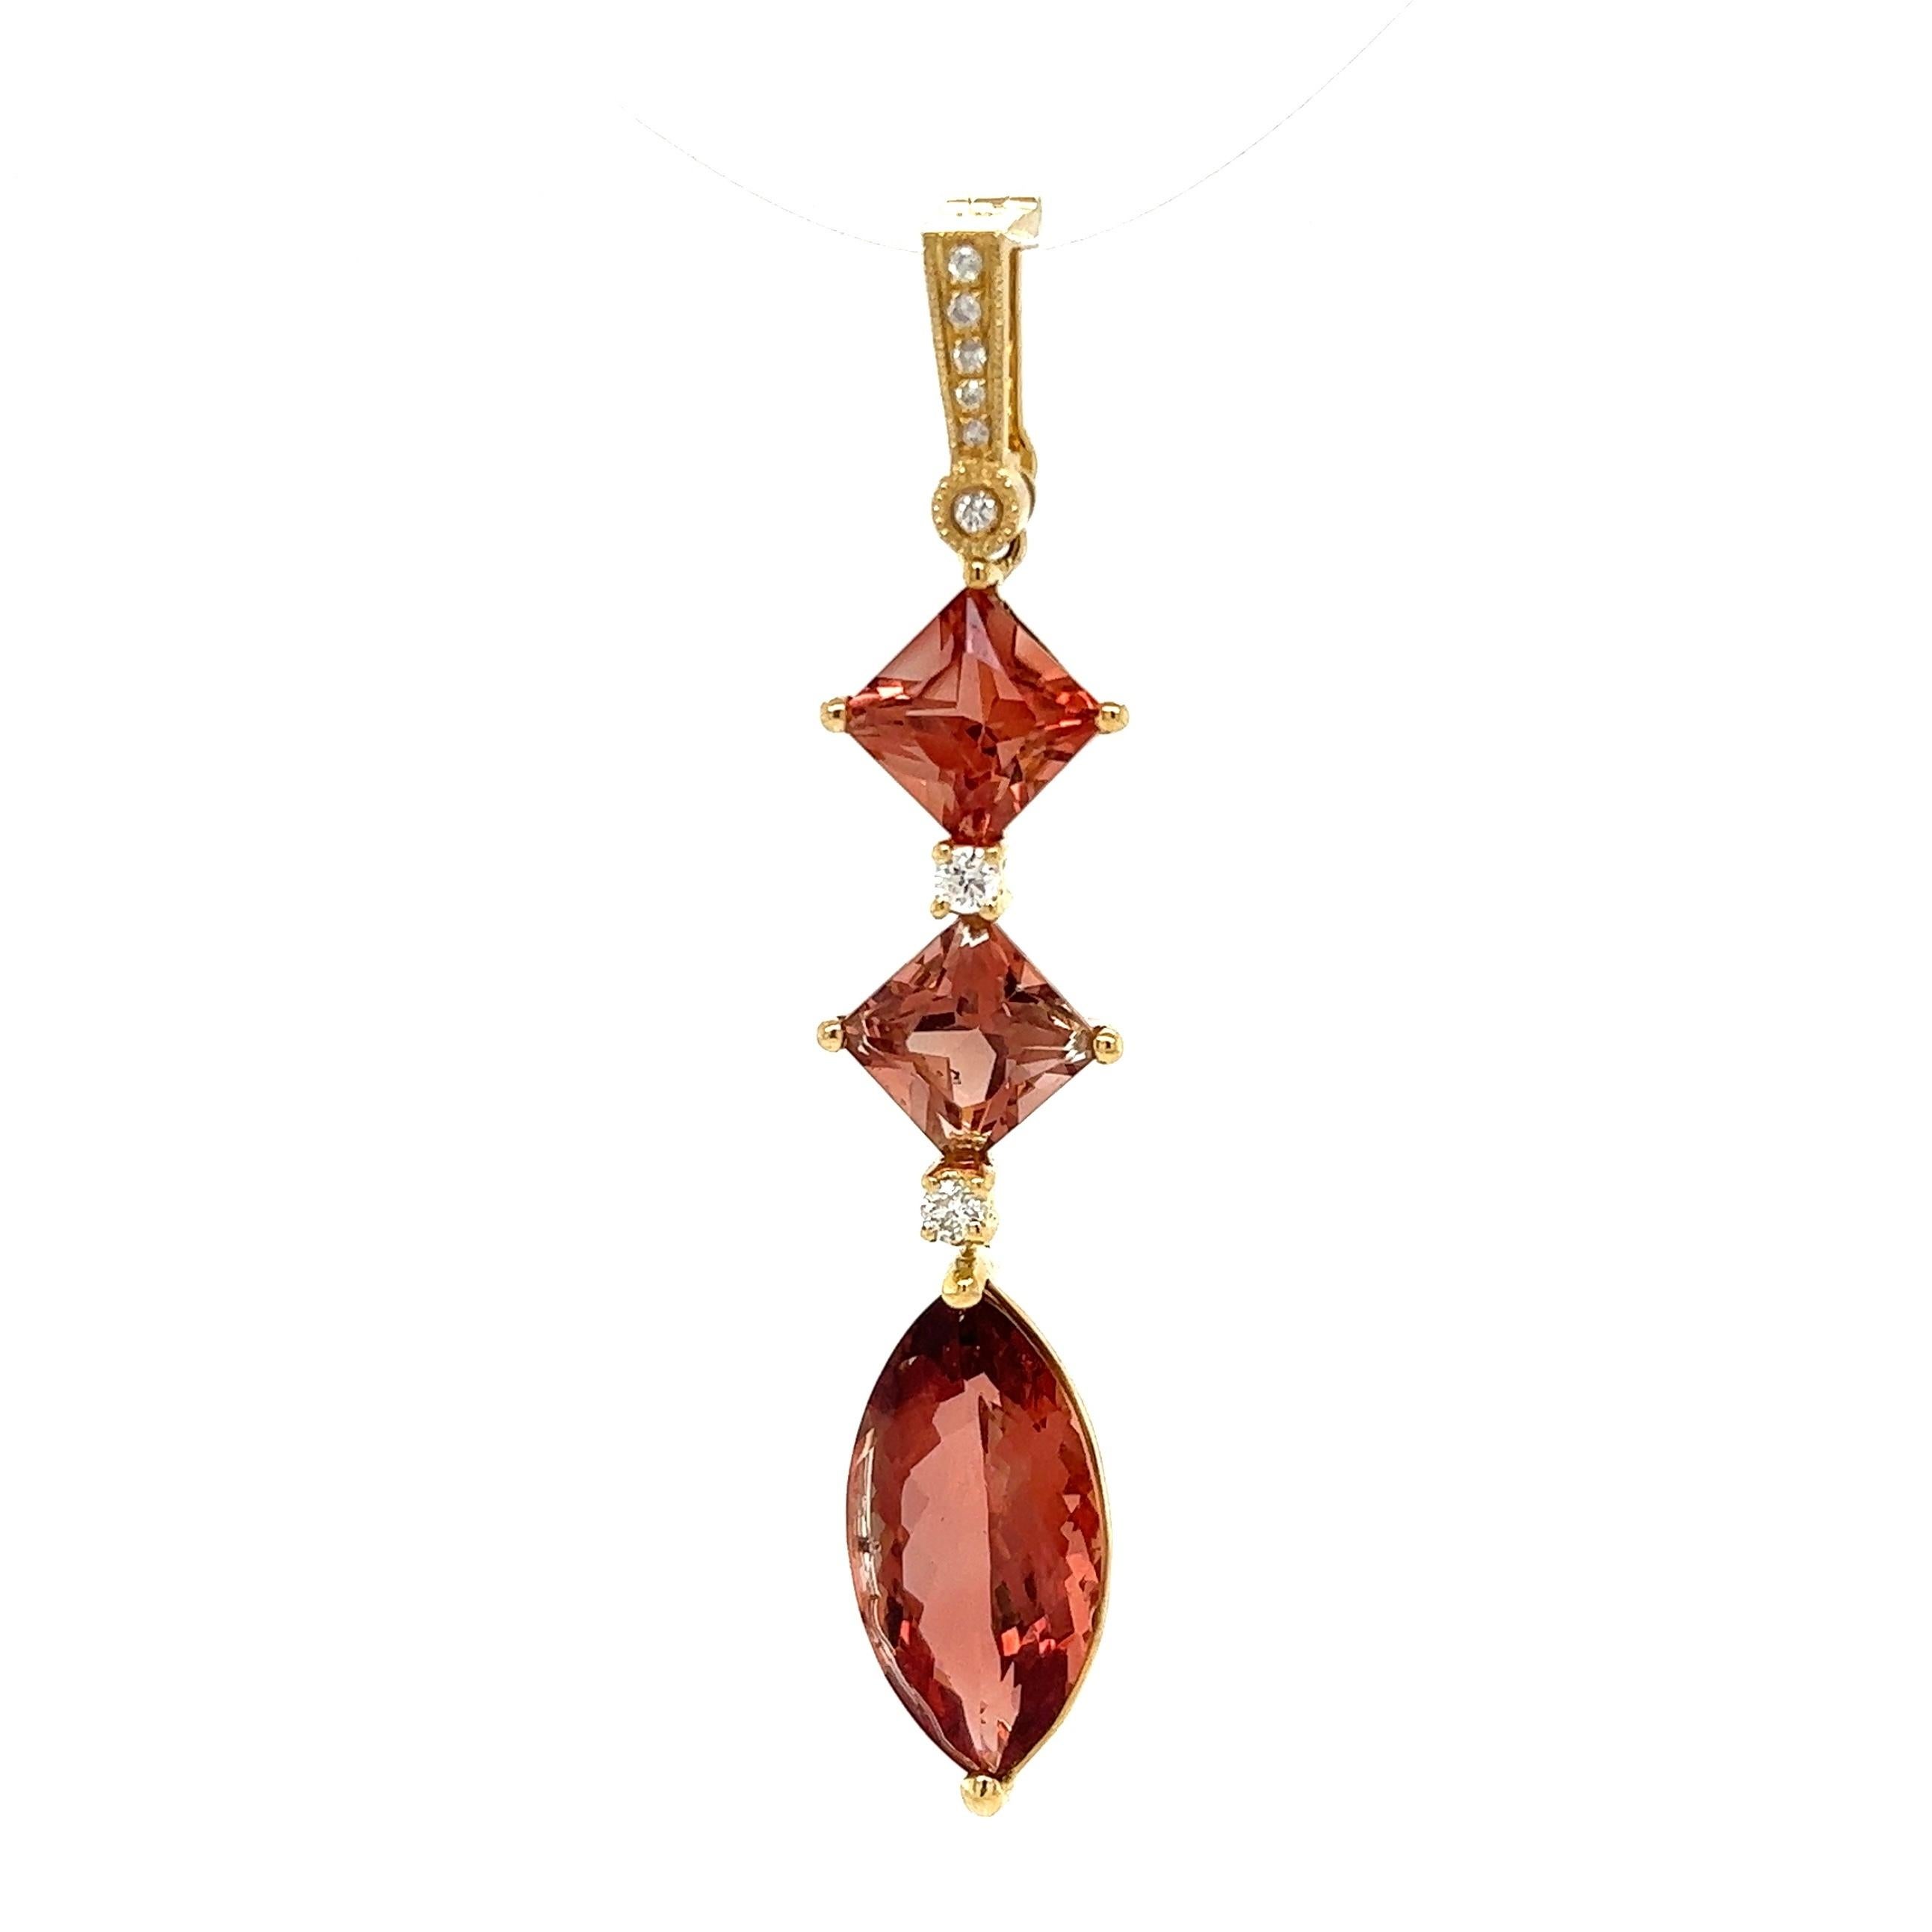 Simply Beautiful! Finely detailed Triple Oregon Sunstone and Diamond Pendant. Hand set with Oregon Sunstone weighing approx. 6.99tcw and Diamonds approx.  0.14tcw on Open-able Bale. Pendant measures approx. 2.0” l x 0.40” w. Hand crafted in 14K